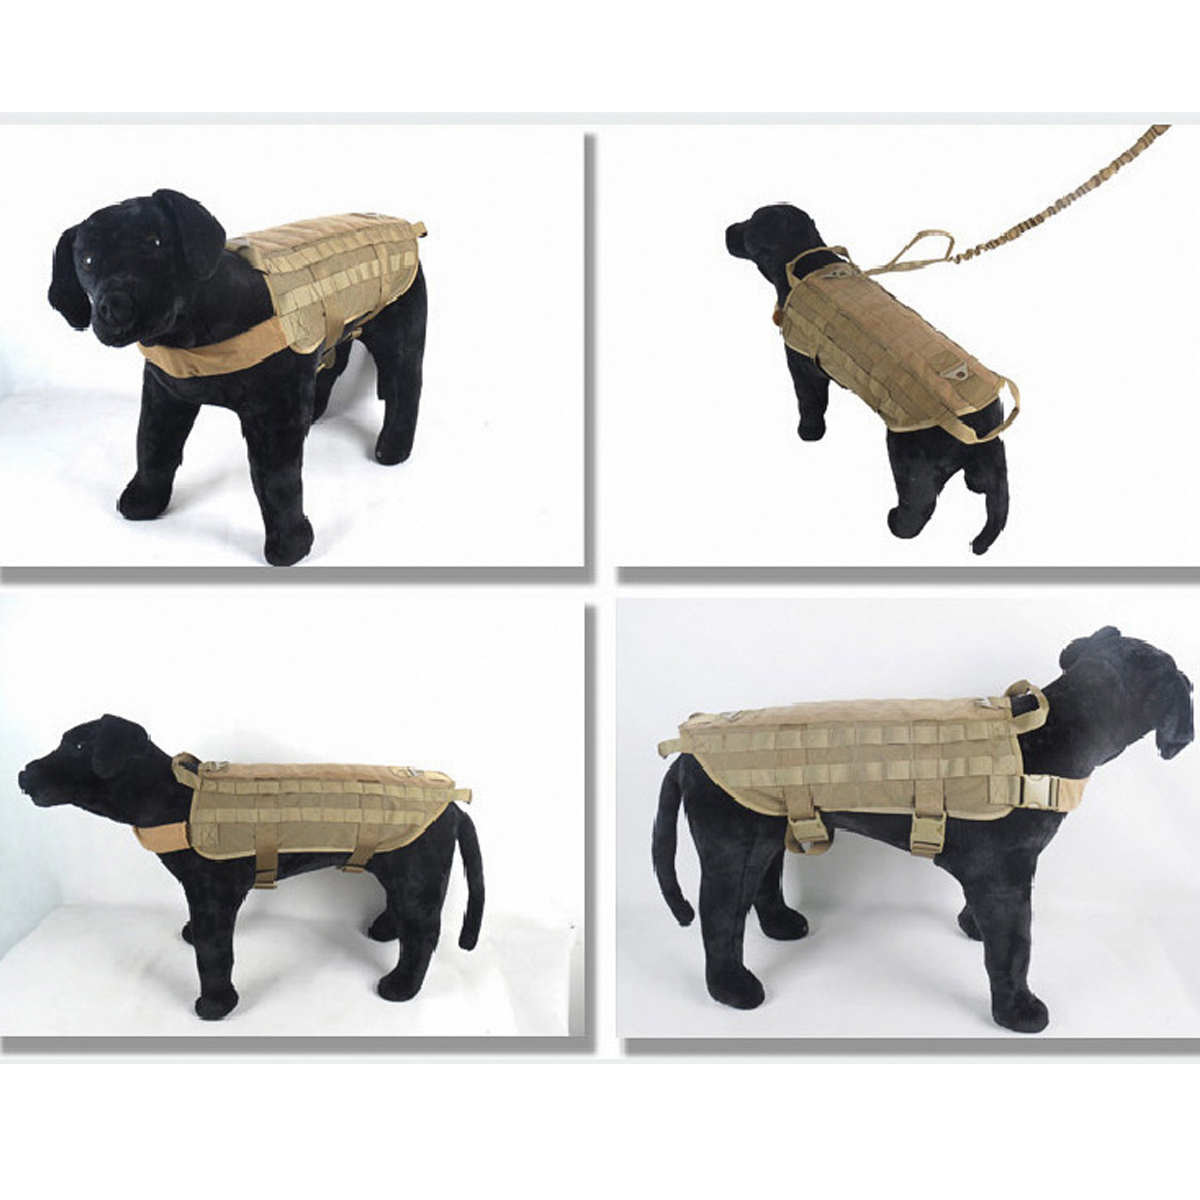 Dog-Vest-Training-Tactical-Army-Dog-Tape-Military-Dog-Clothes-Load-Bearing-Harness-Outdoor-Training--1817000-10